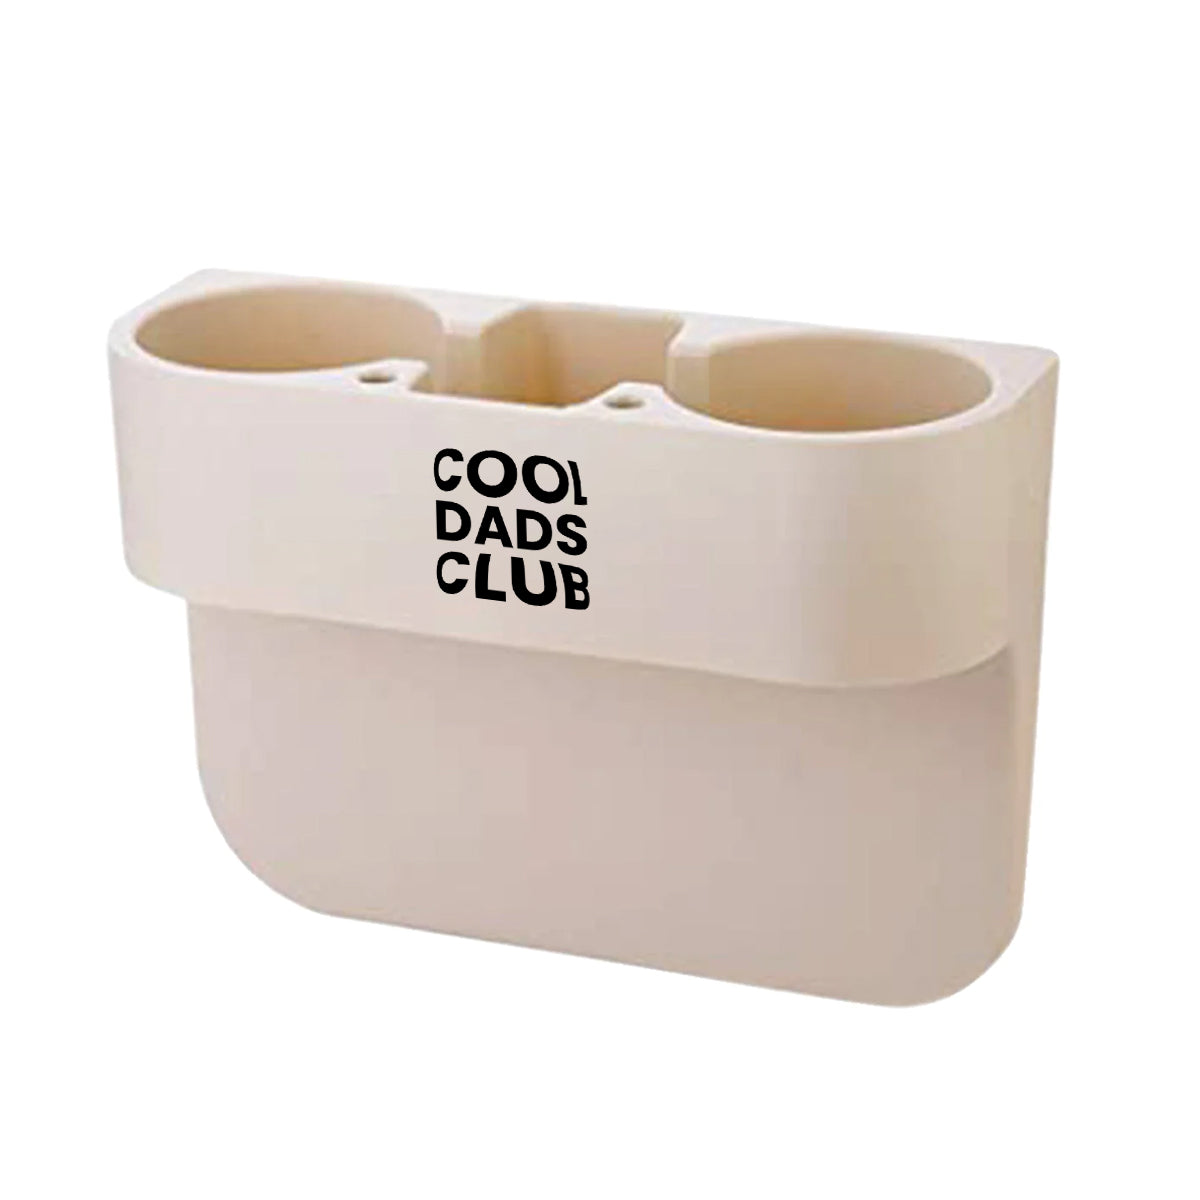 COOL DADS CLUB Cup Holder Portable Multifunction Vehicle Seat Cup Cell Phone Drinks Holder Box Car Interior Organizer, Custom For Your Cars, Father's Day Gift, Car Accessories 02